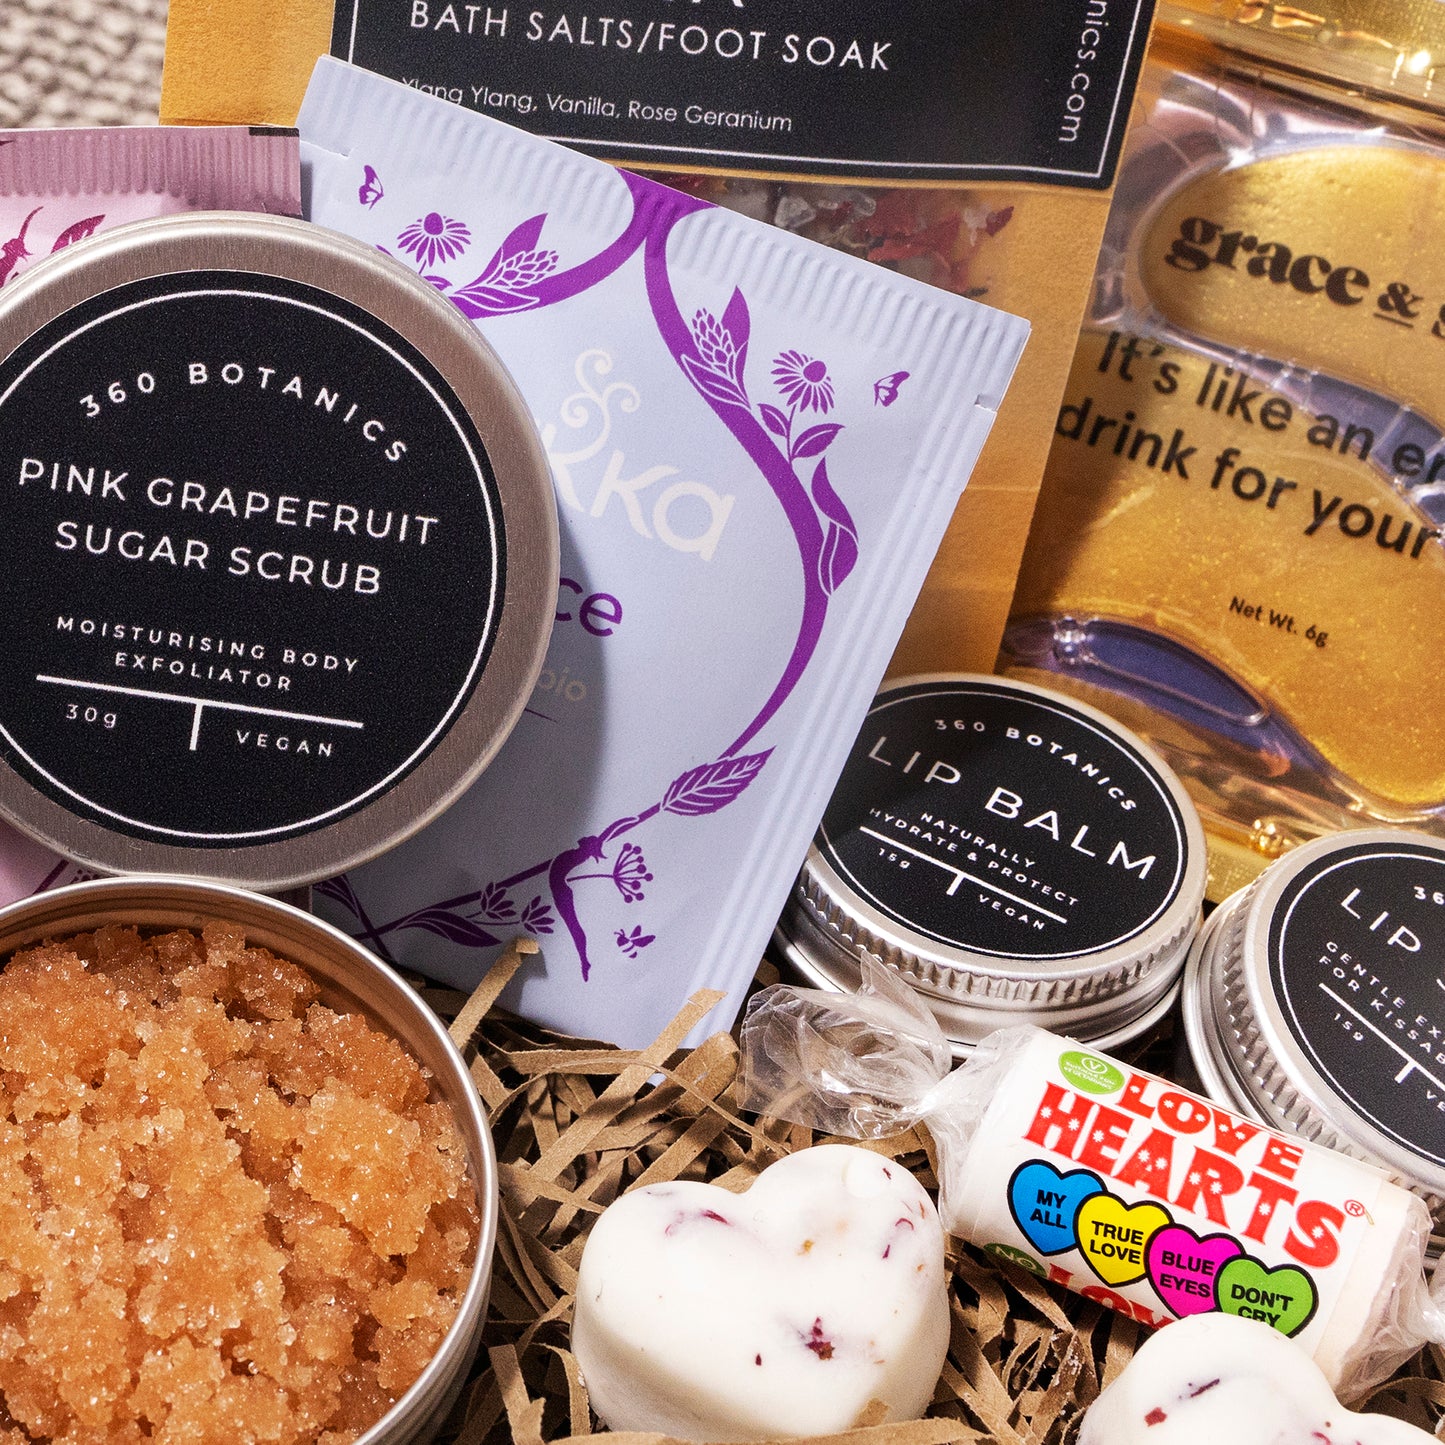 Close-up of a 360 Botanics gift set featuring a variety of skincare products. Visible items include Pink Grapefruit Sugar Scrub in an open tin revealing its texture, heart-shaped bath bombs, lip balm tins, and colorful Love Hearts candy. Packets of tea and bath salts with descriptions add to the indulgent self-care theme of the basket